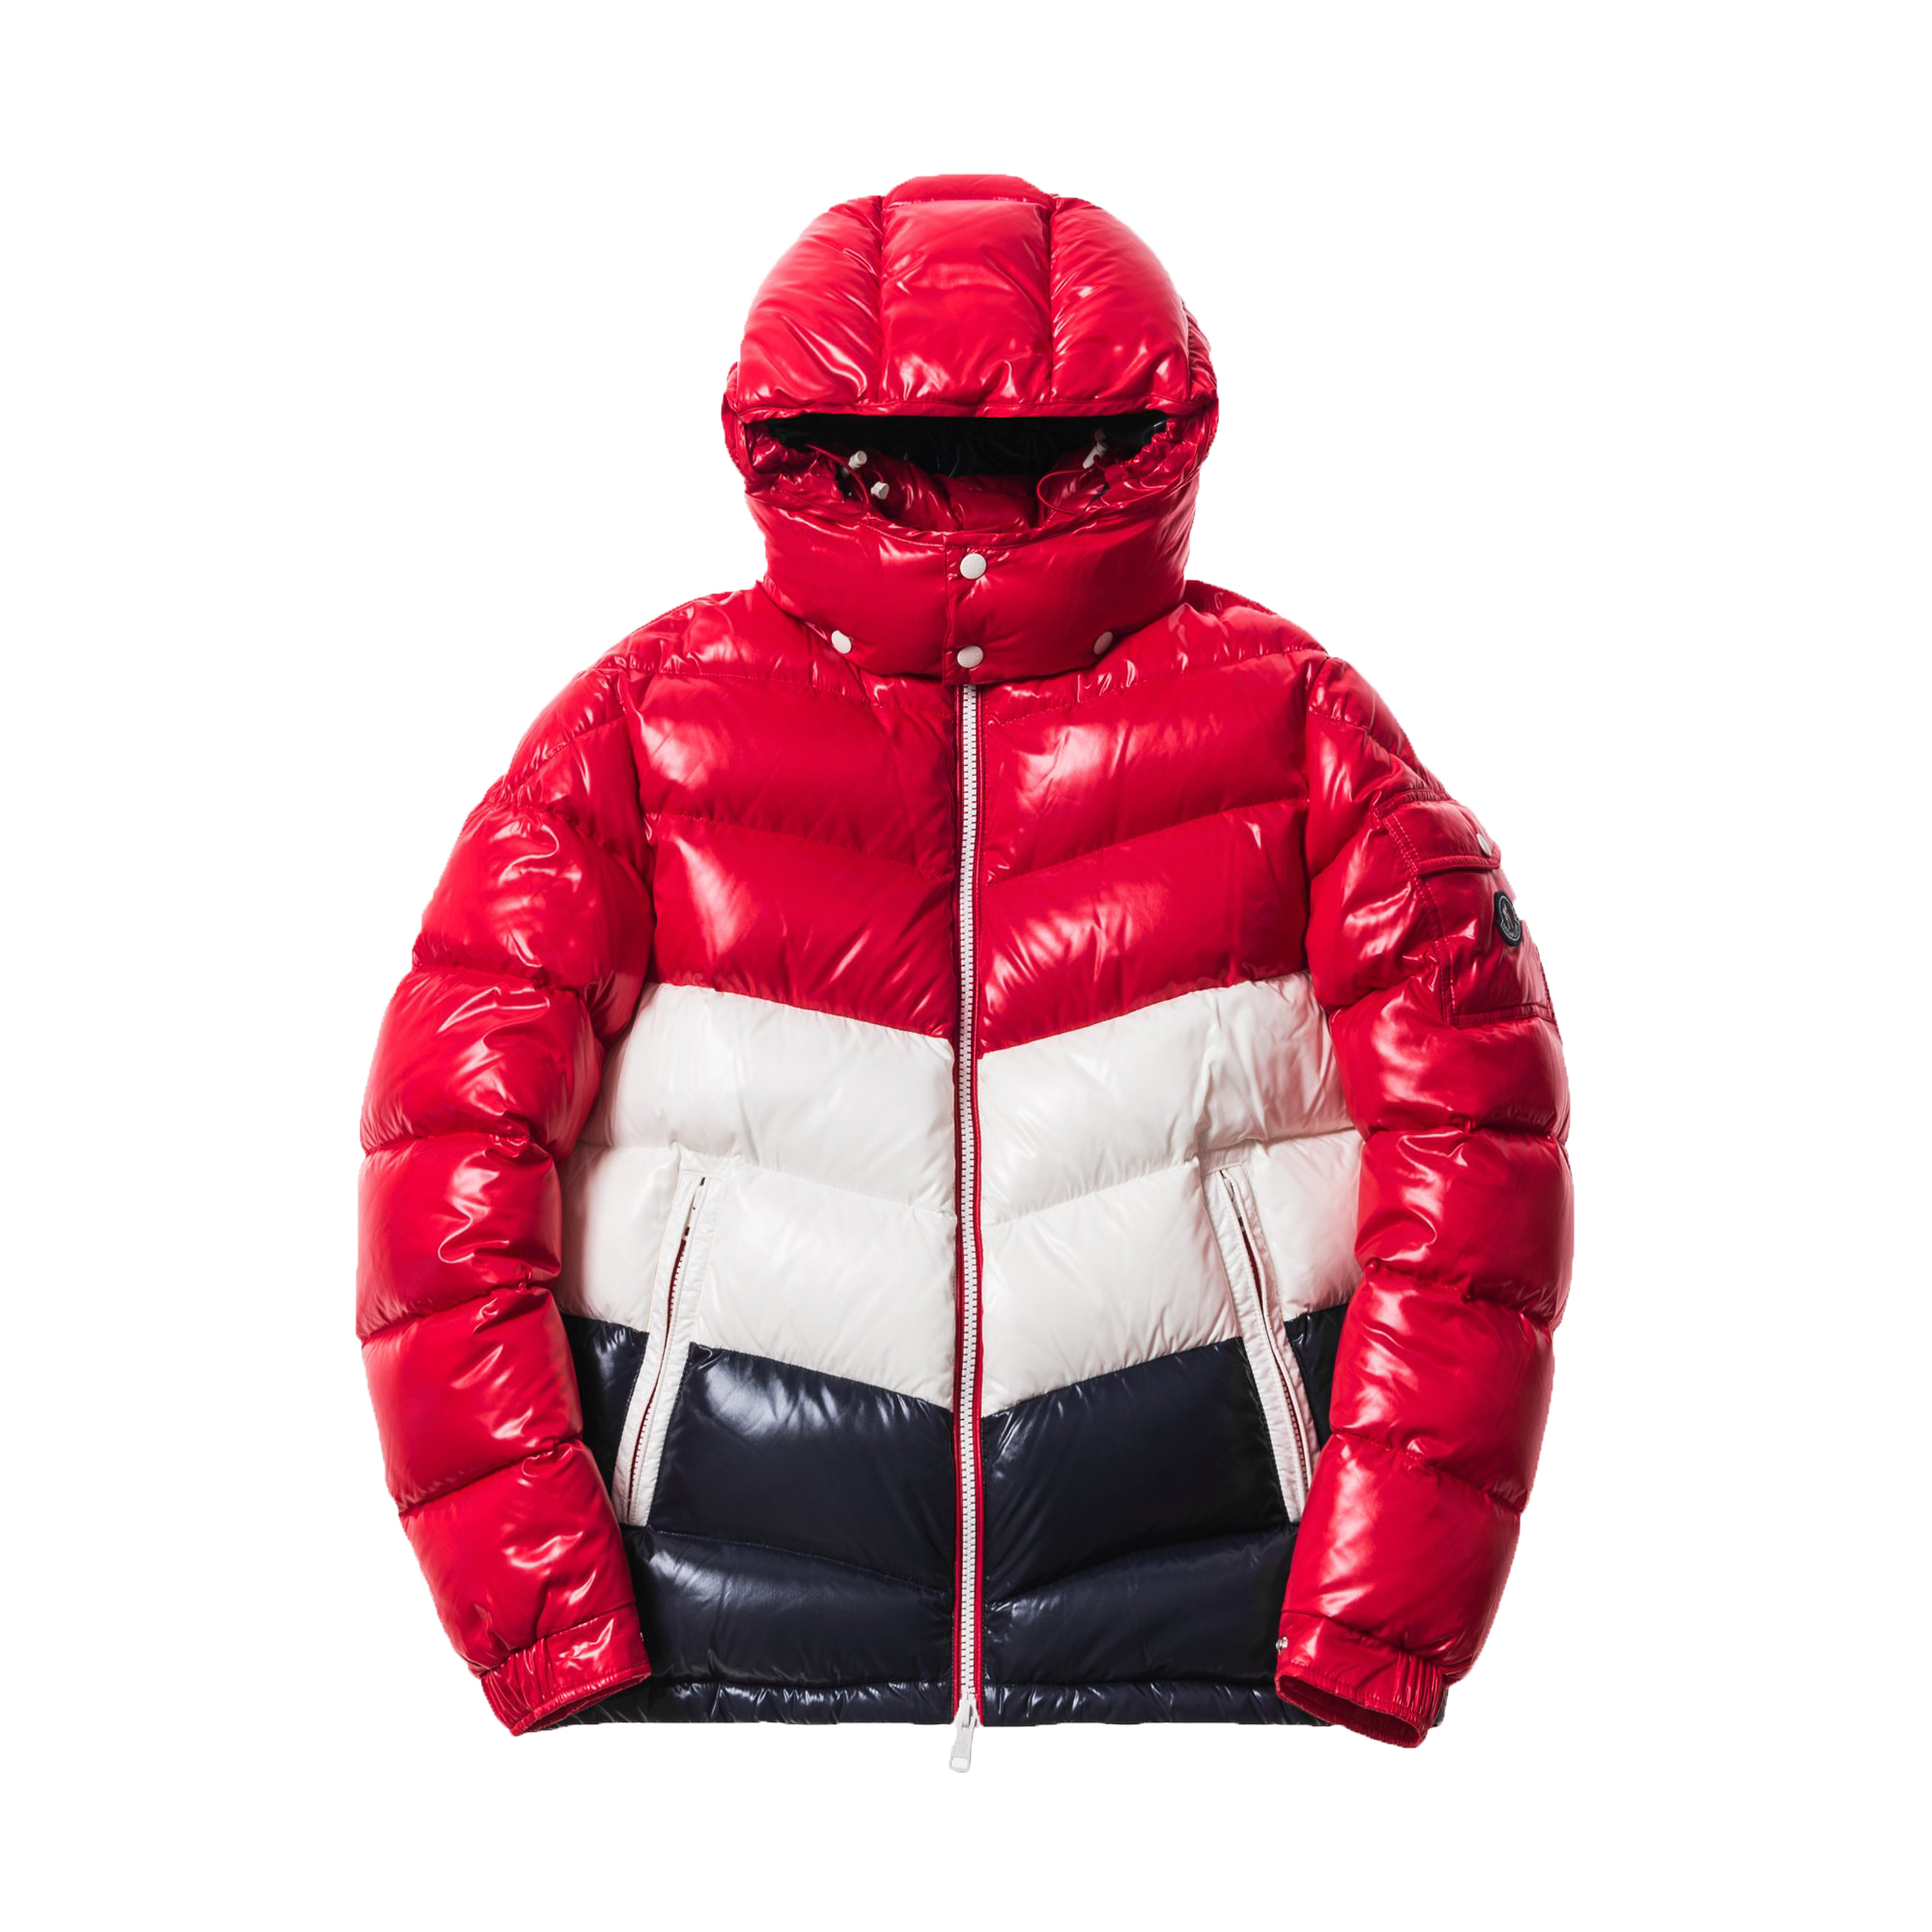 Kith Moncler Rochebrune Classic Down Jacket Navy/Red/White